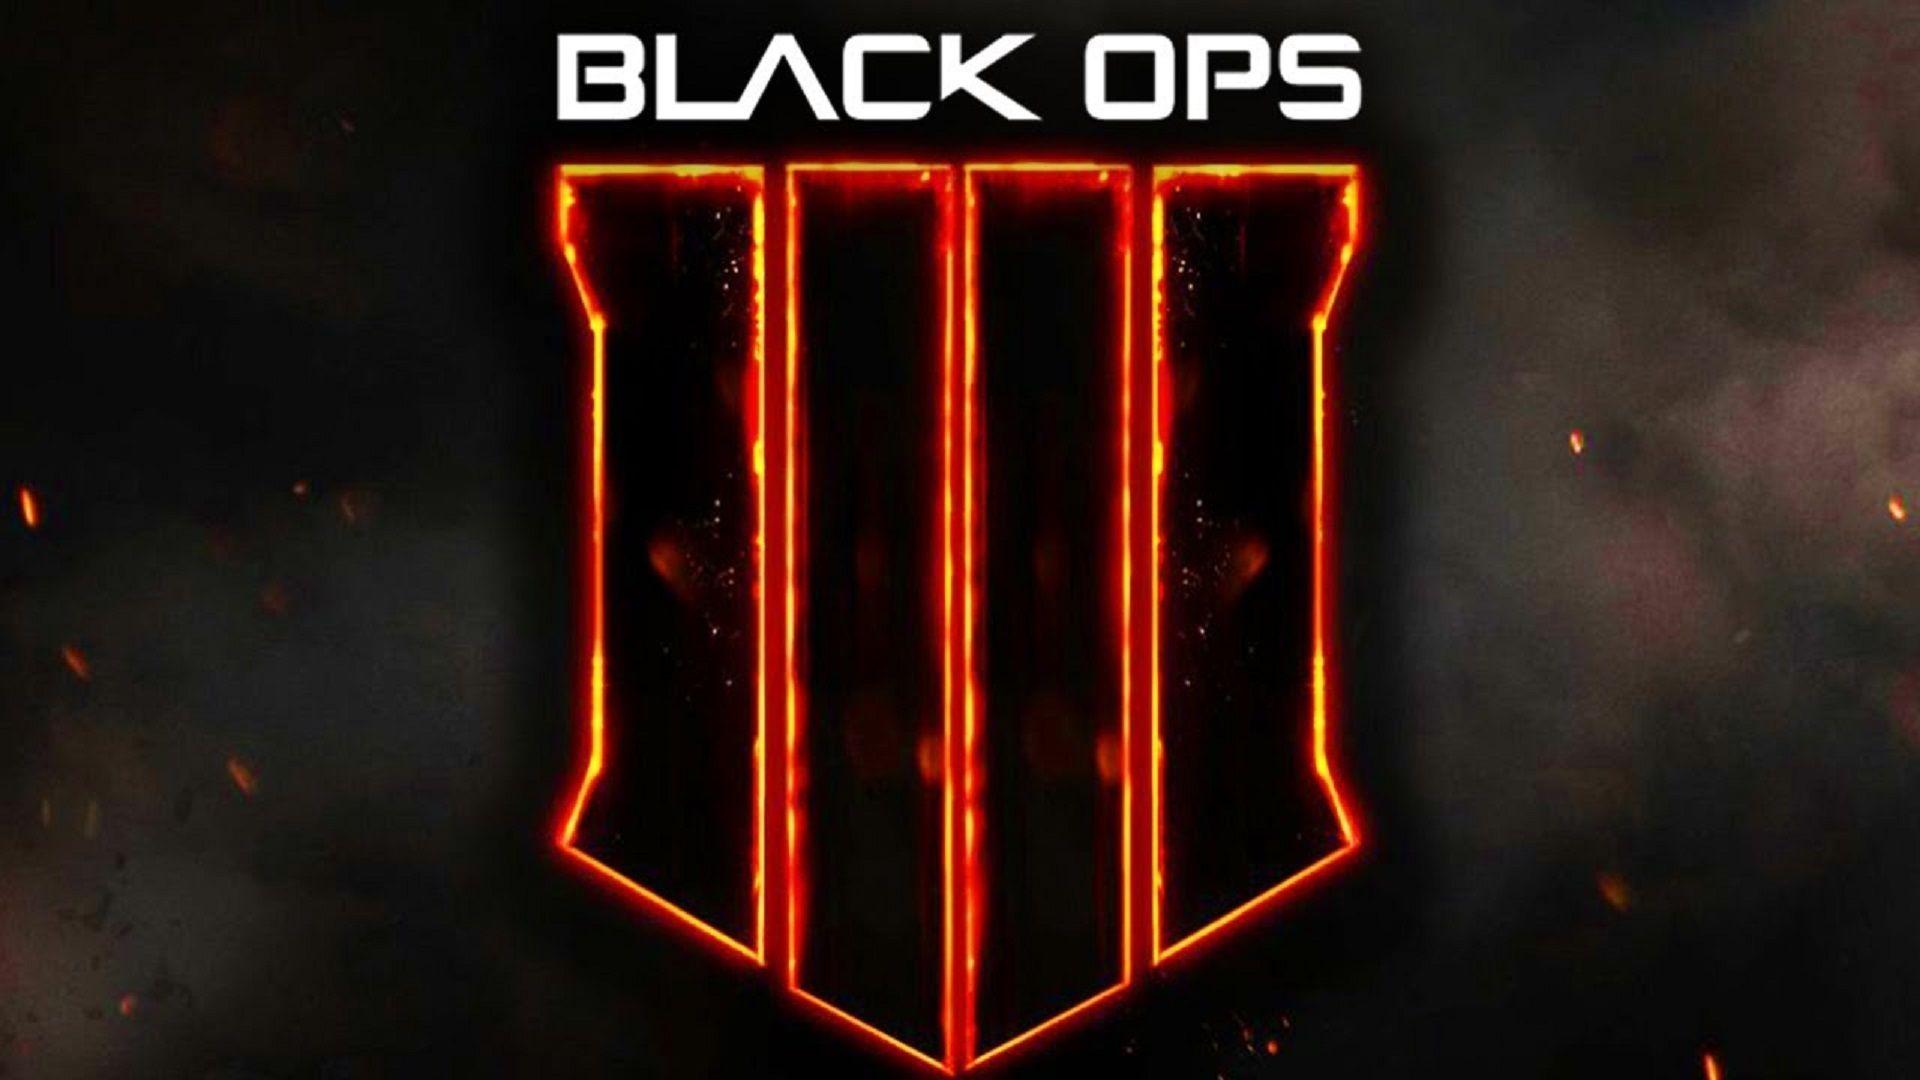 1080p call of duty black ops 4 images